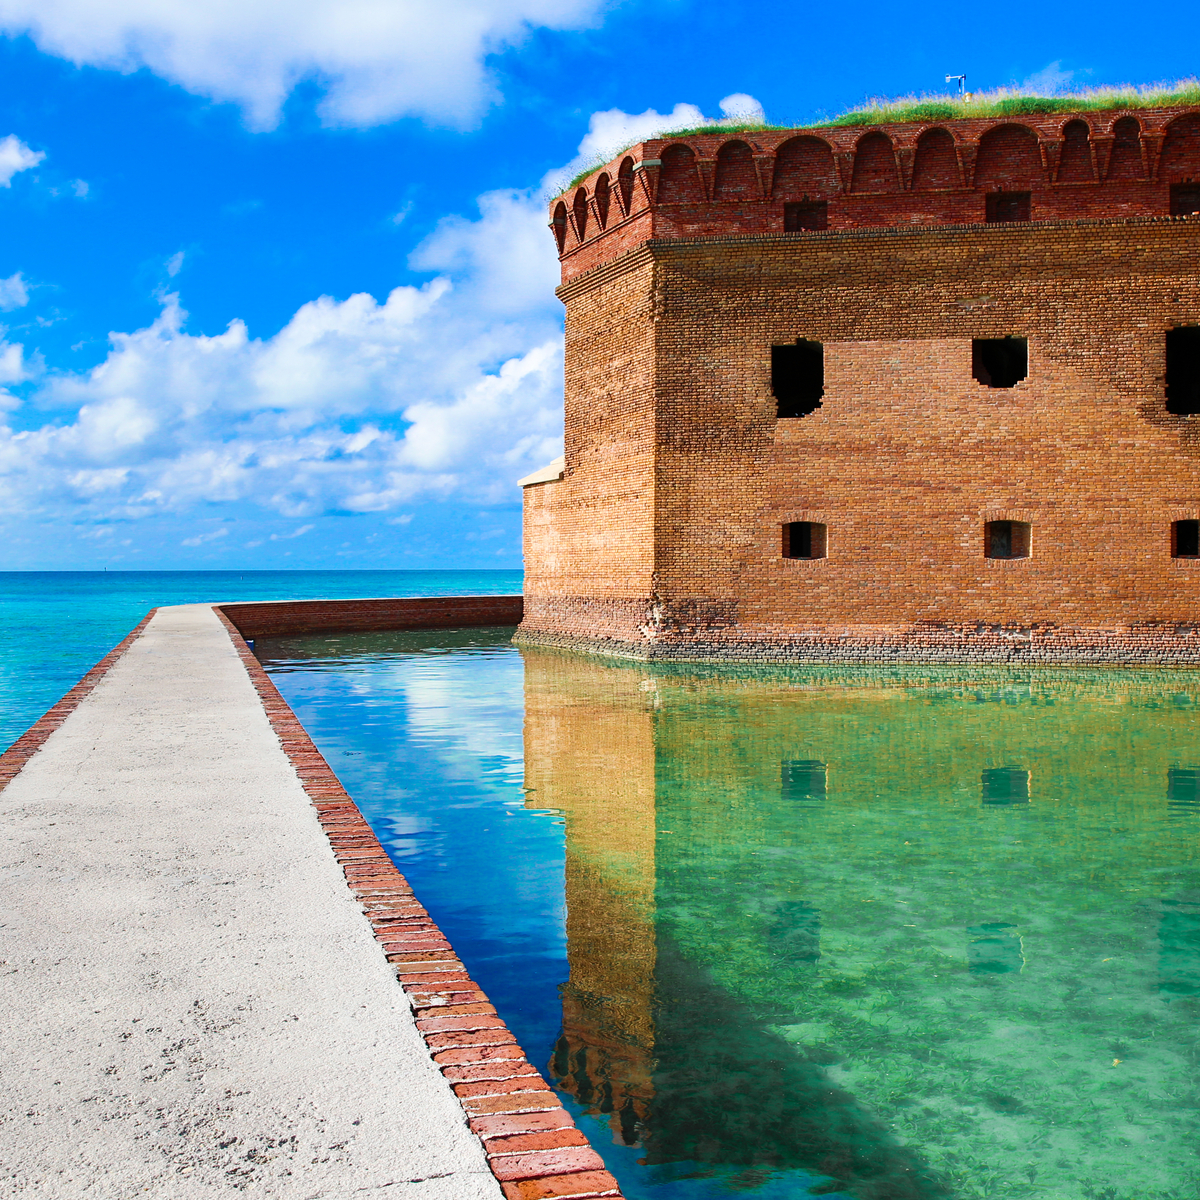 Fort Jefferson, Dry Tortuga National Park